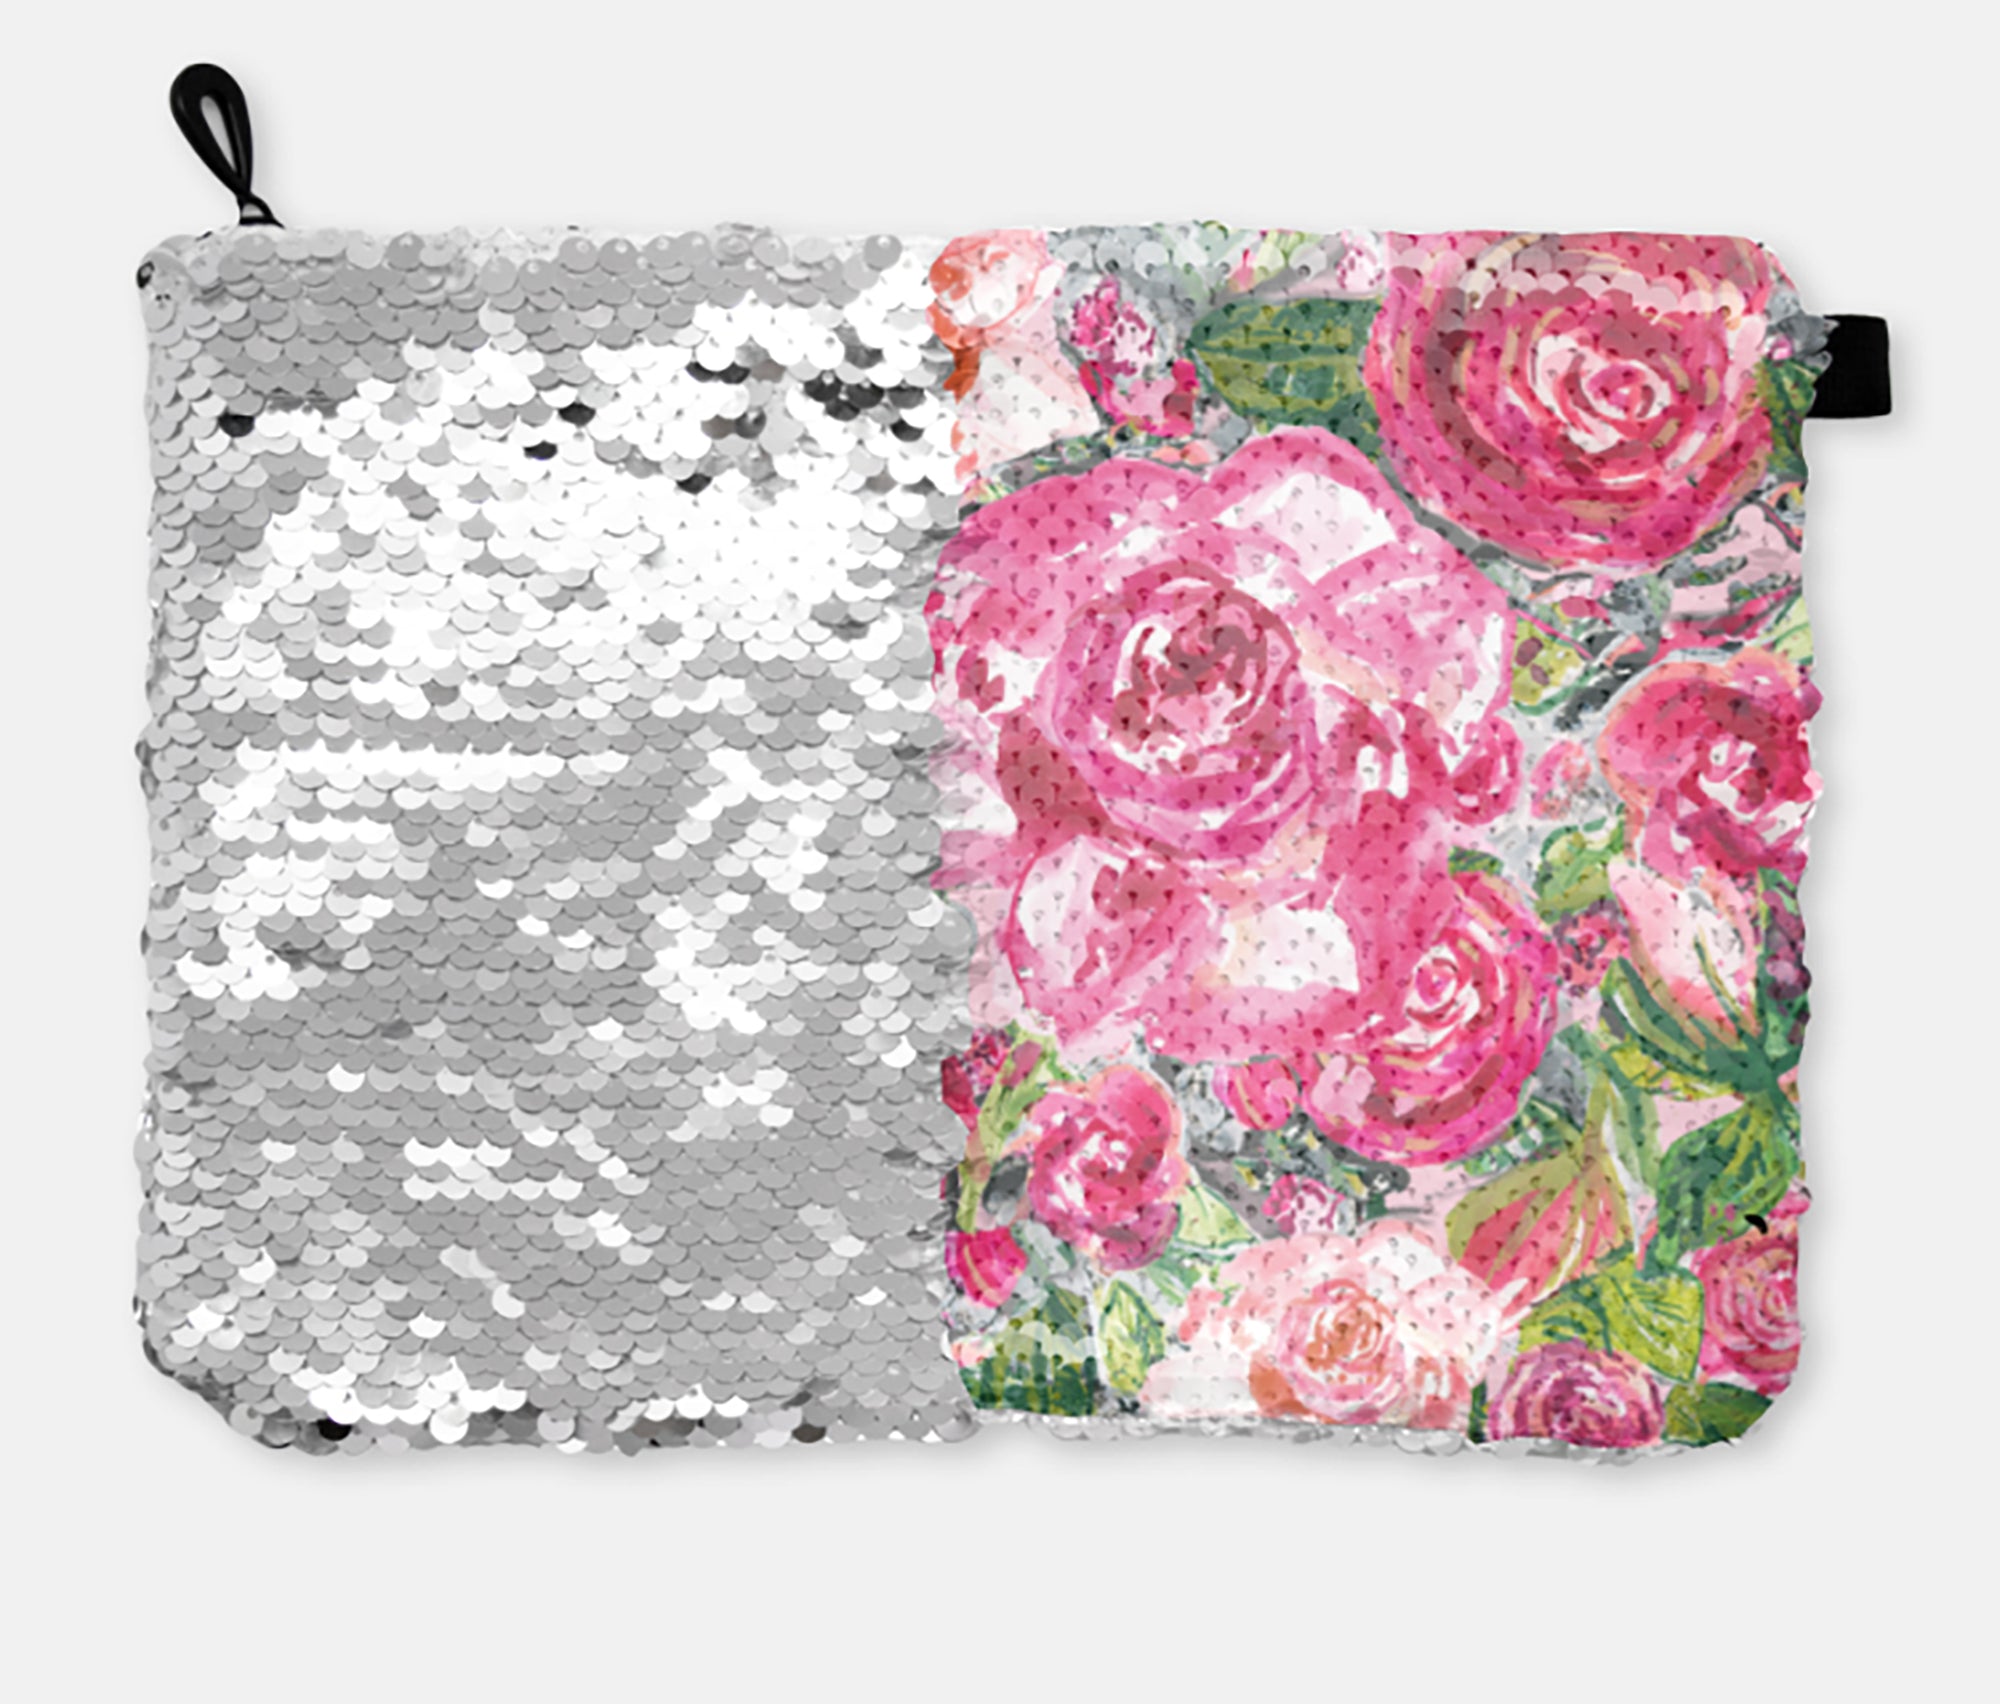 COSMETIC BAG - ROSE'S COTTAGE / SILVER SEQUINS - Dreams After All